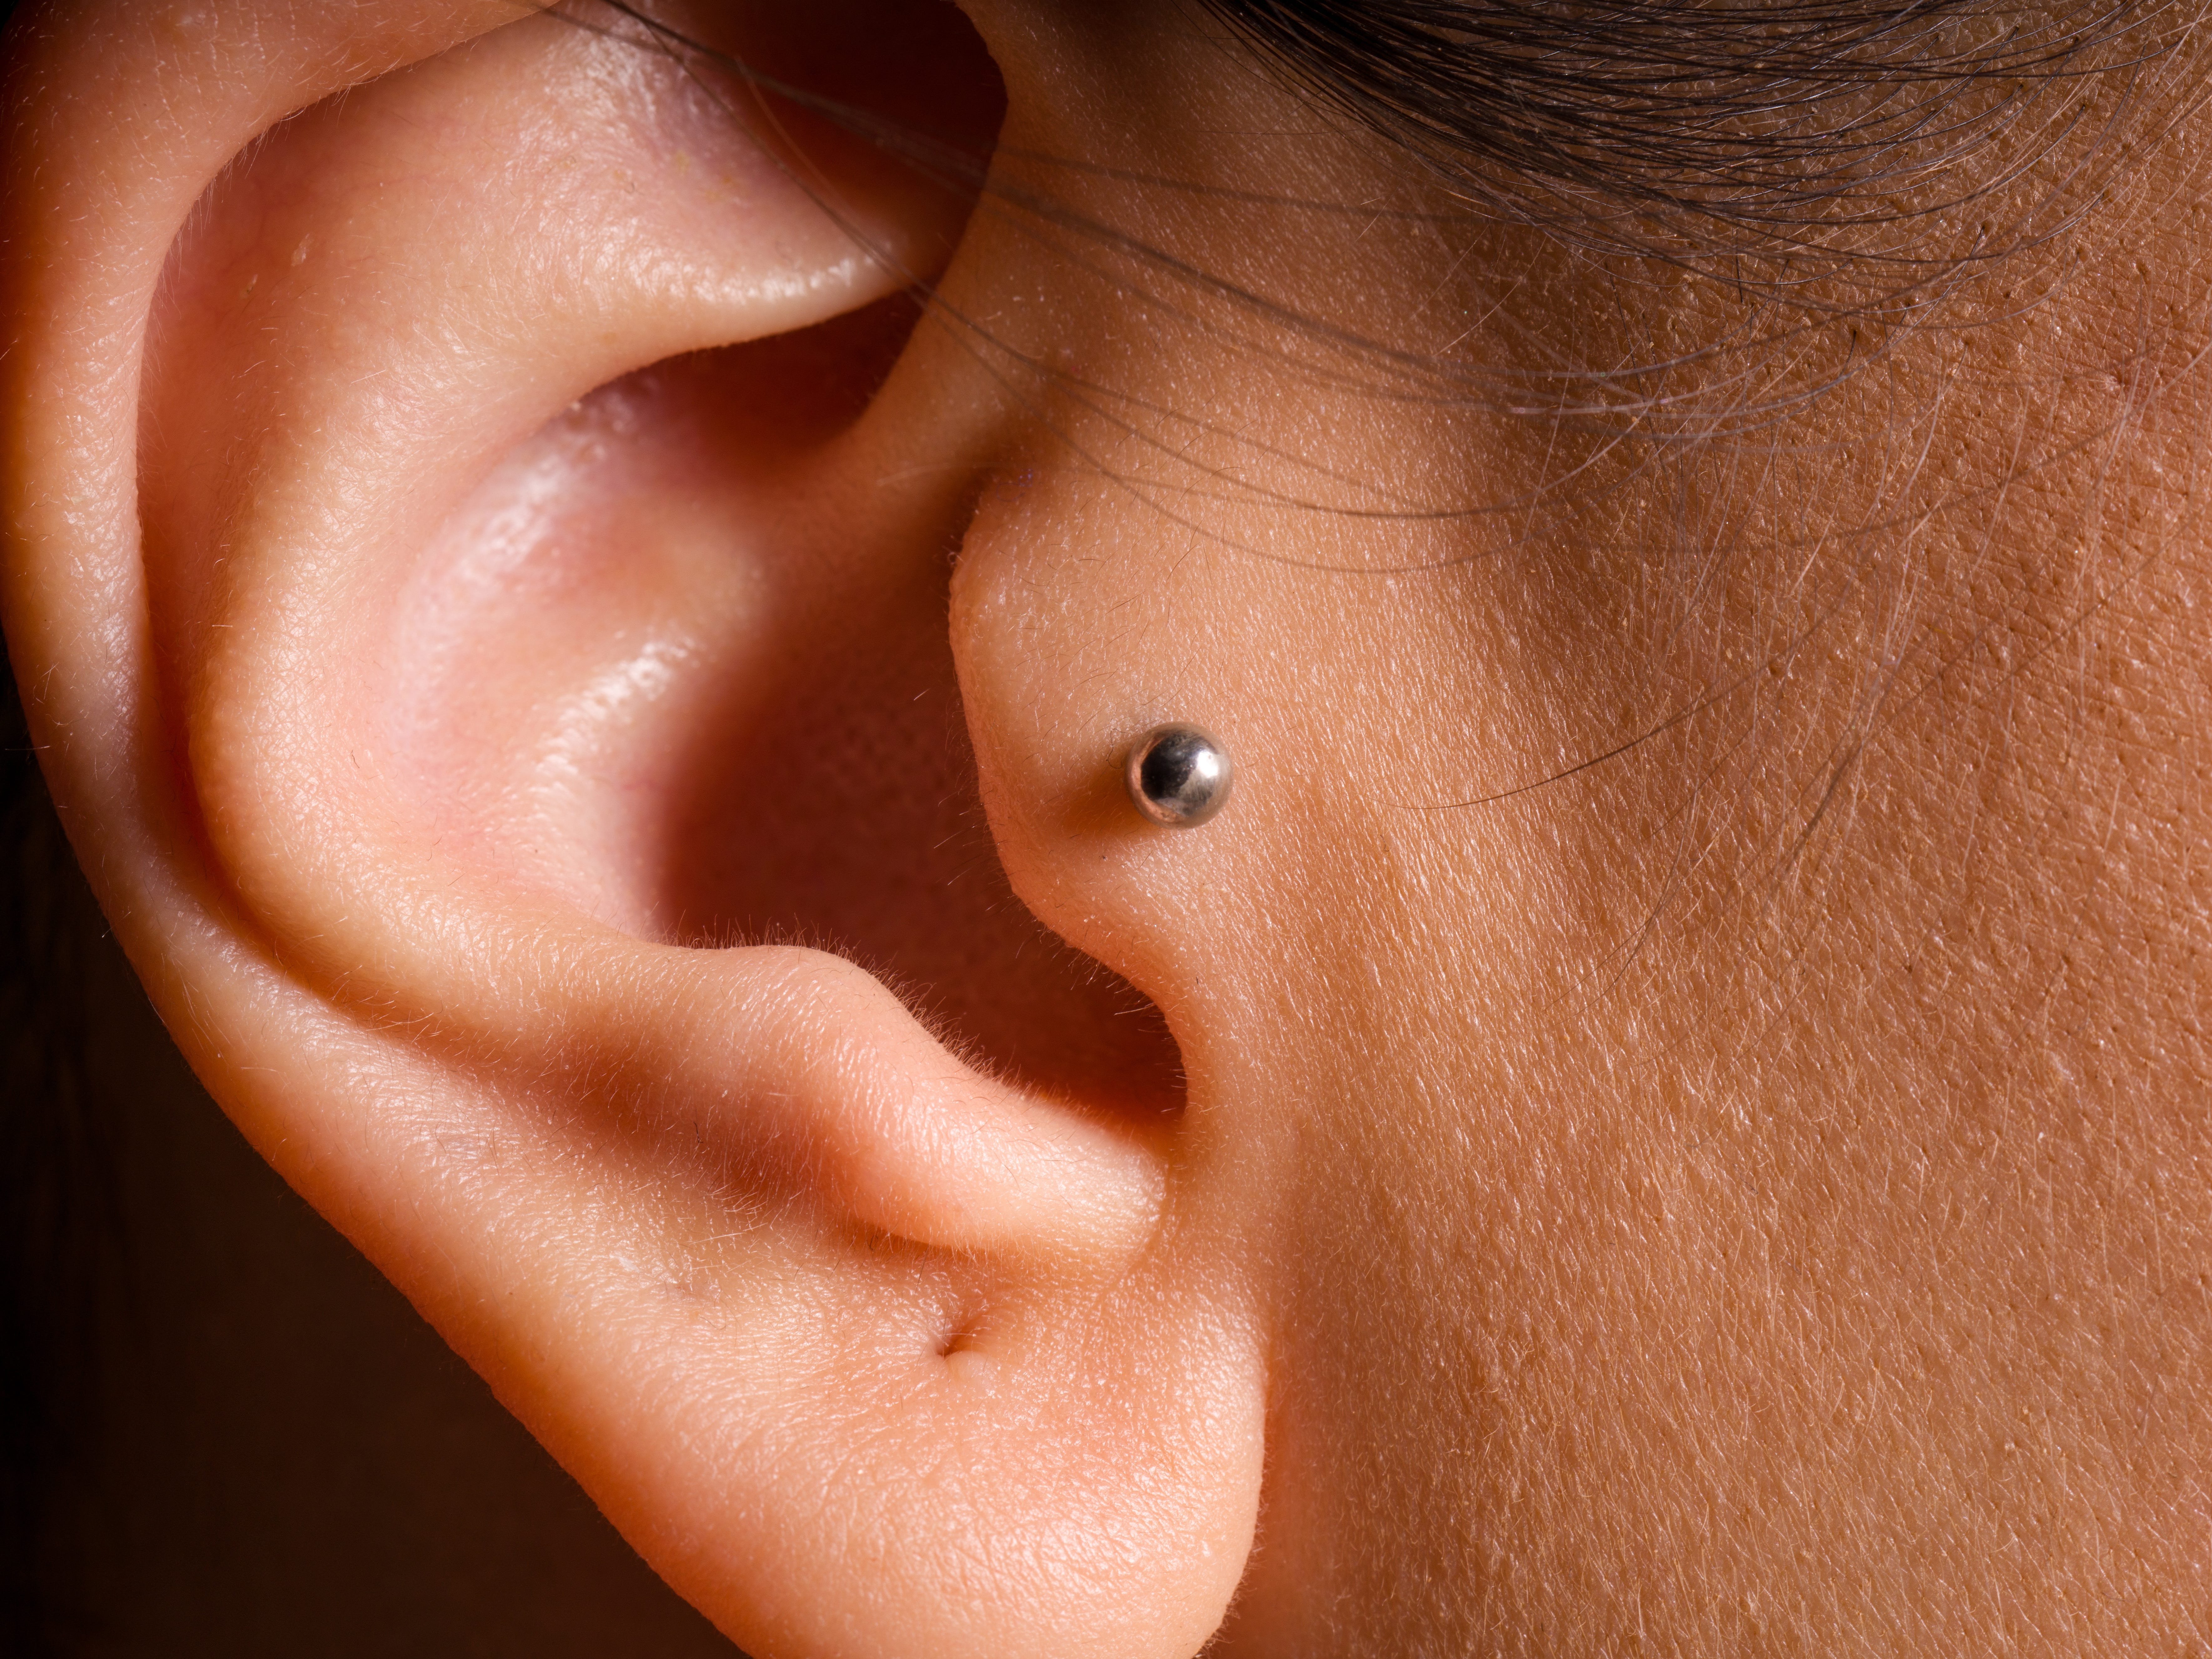 Here are 4 most painful places to get a piercing